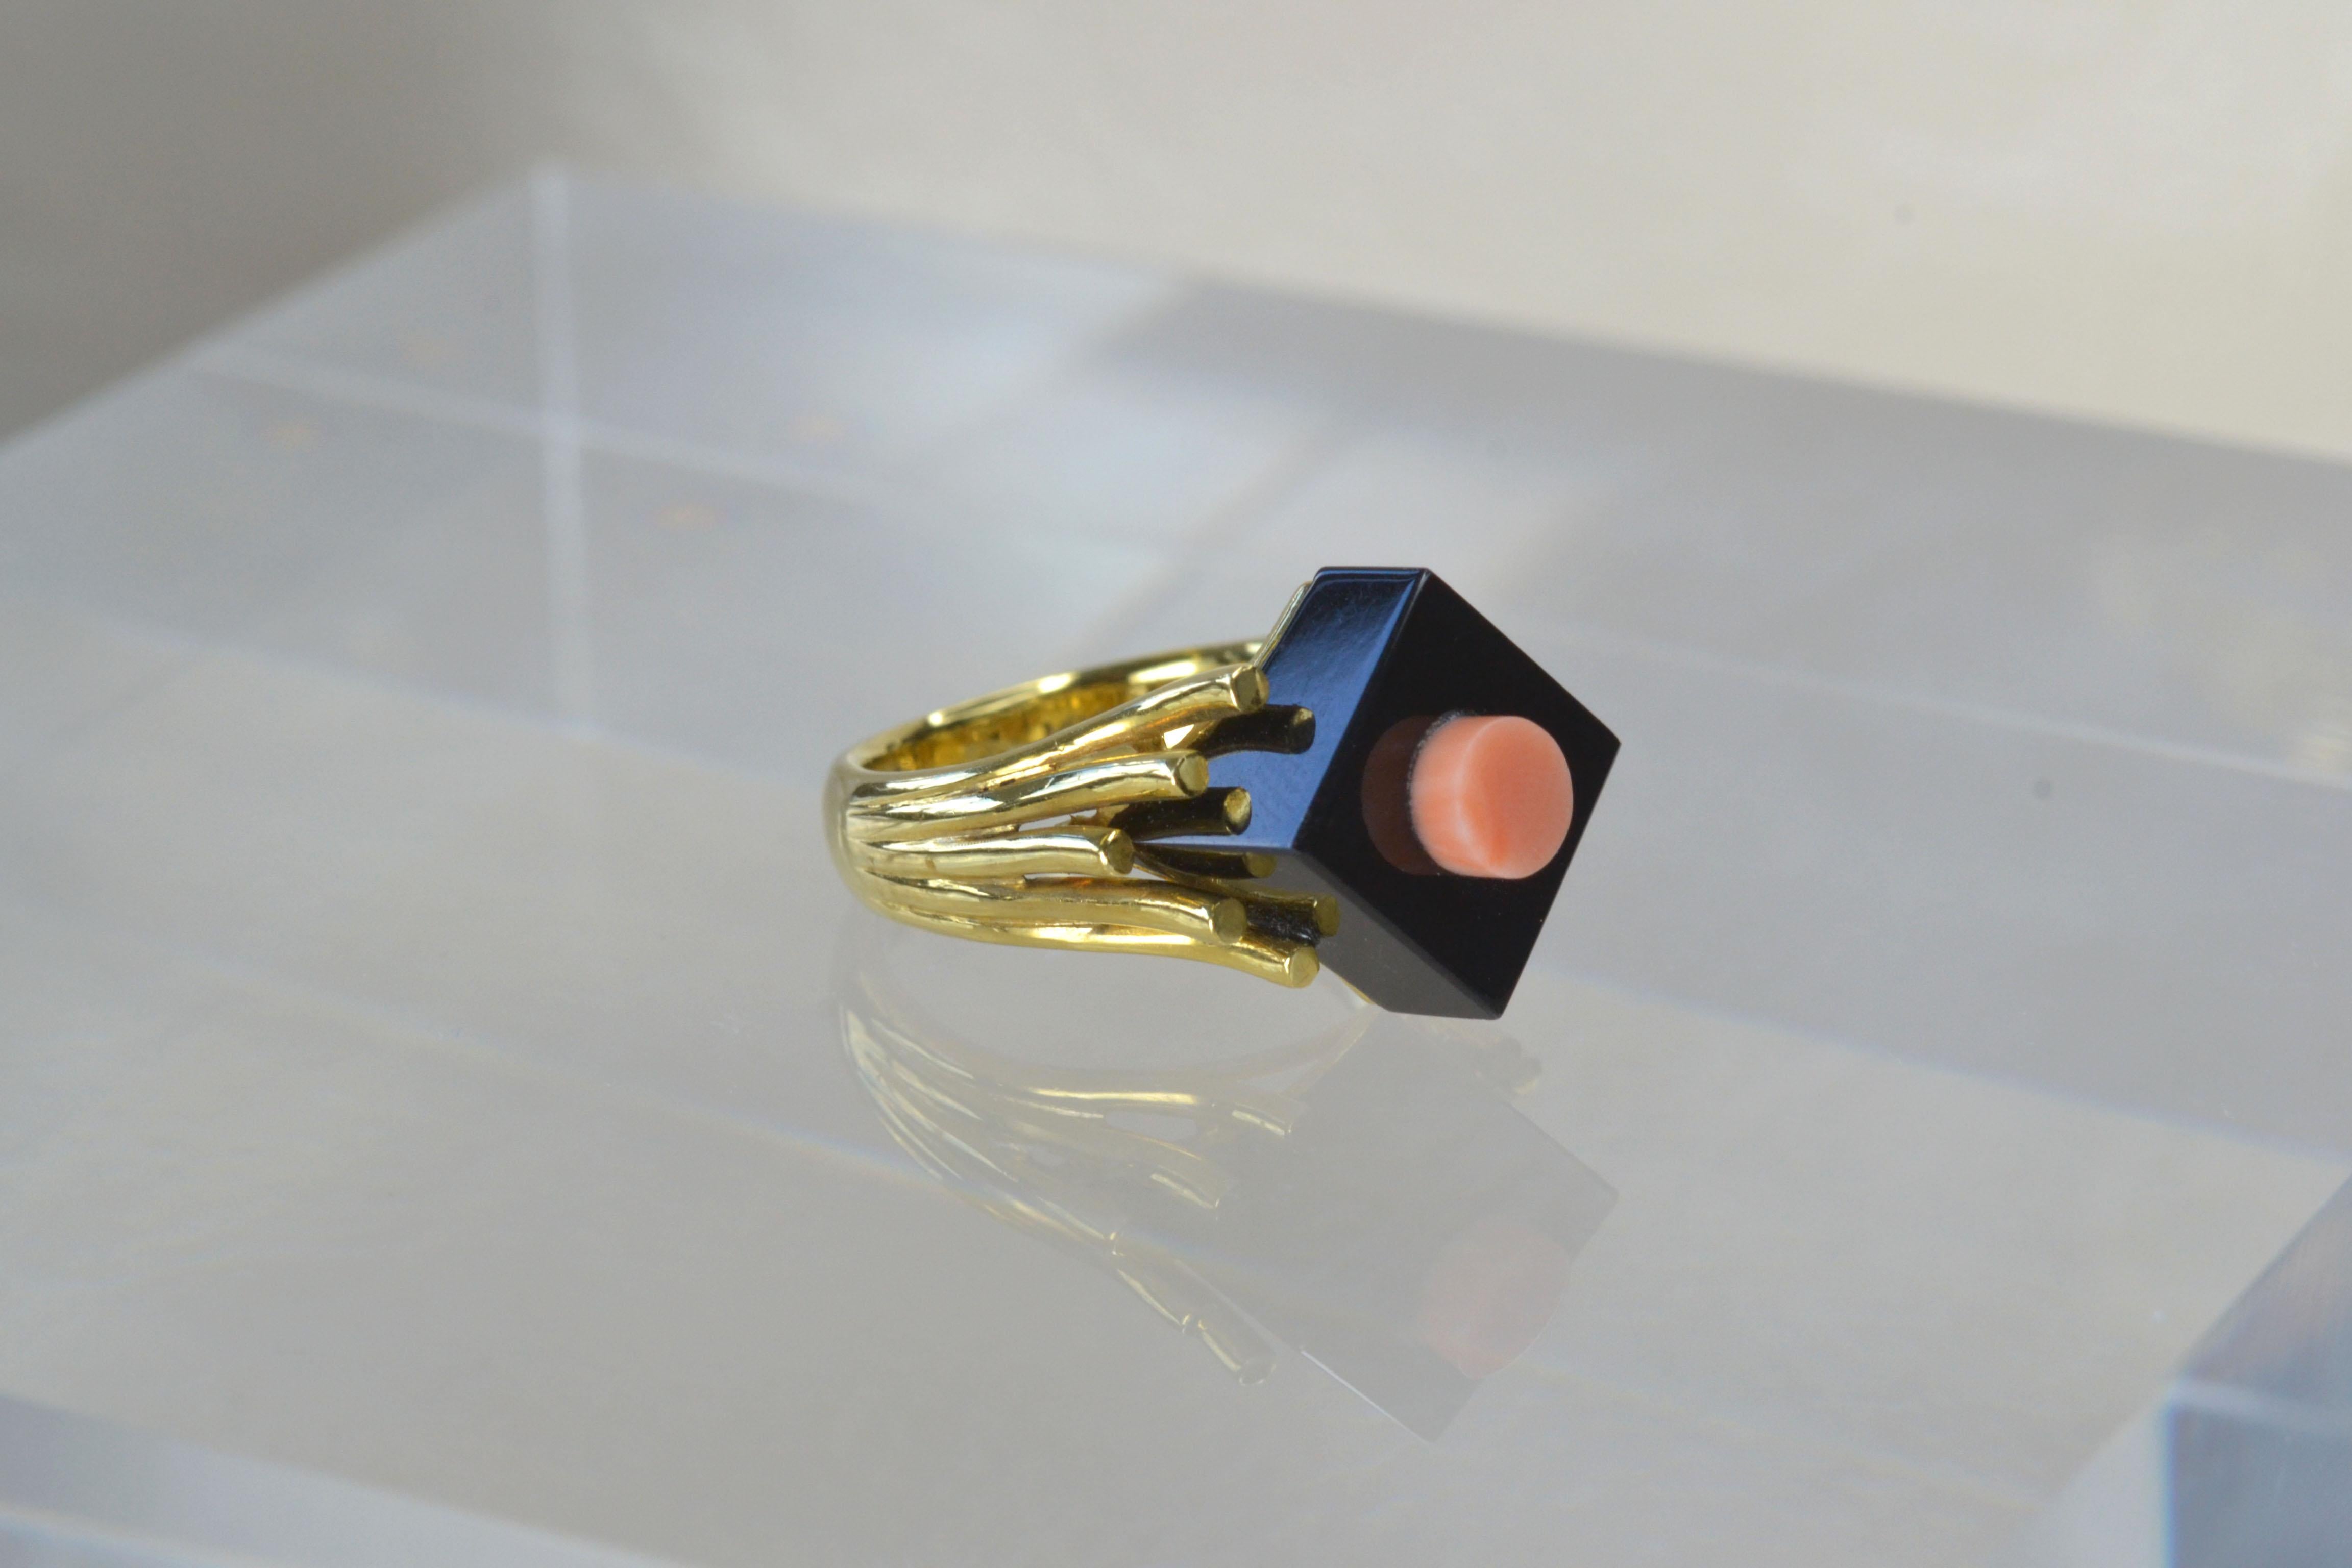 Vintage 14k Gold Coral & Onyx Geometric Ring One-of-a-kind

This funky, vintage ring displays 14k gold tentacles climbing up the brilliant onyx, which bears a gorgeous coral shape in its centre. This truly is a stunning statement ring and it